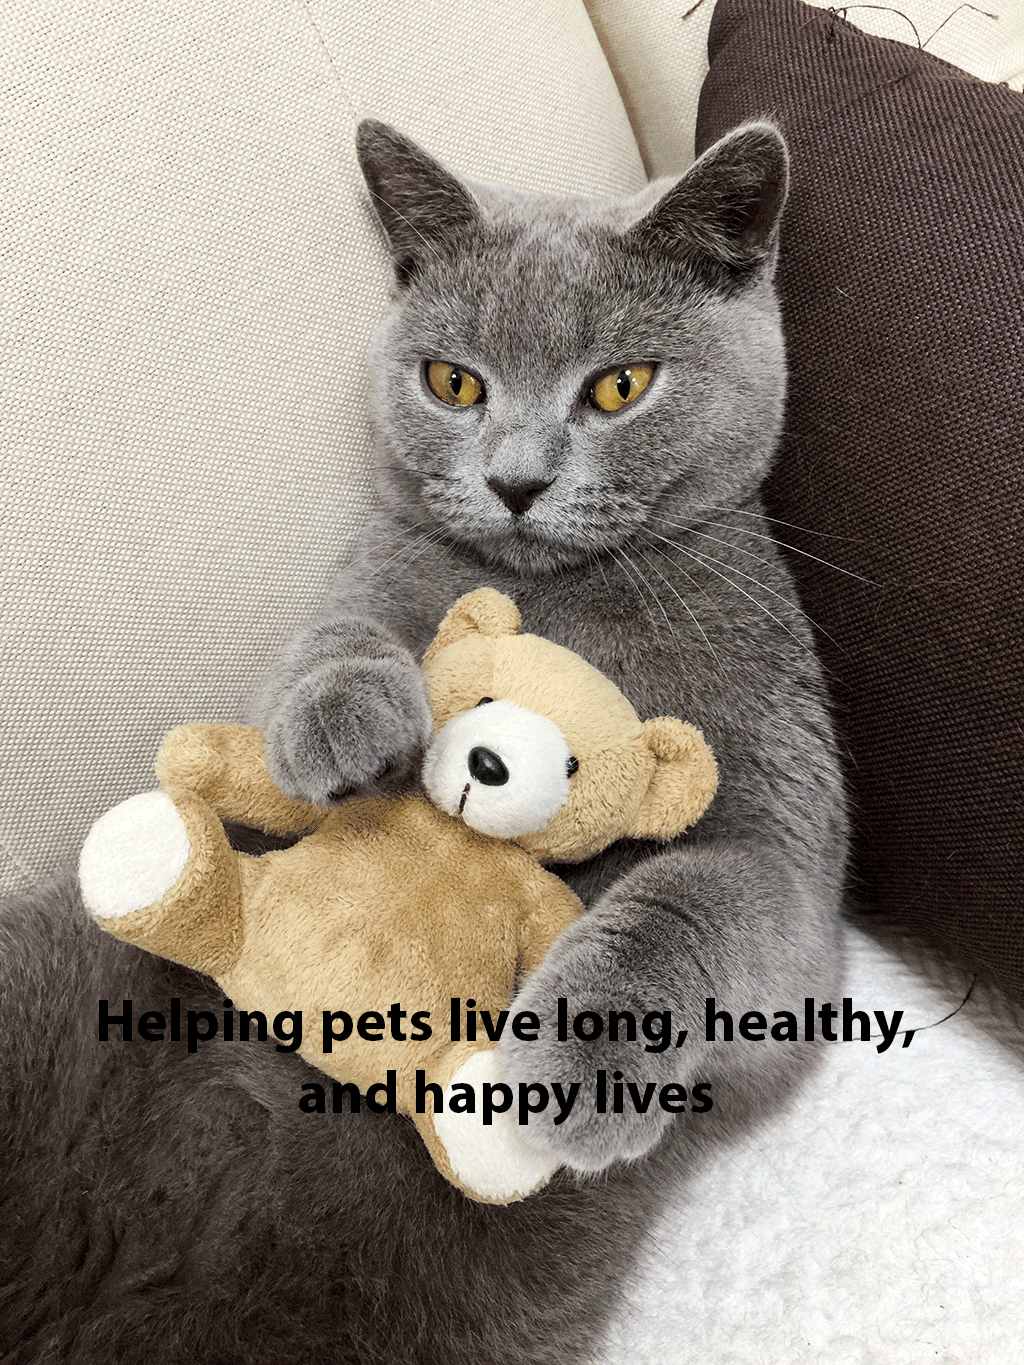 A cat sitting with a teddy on a couch, looking content